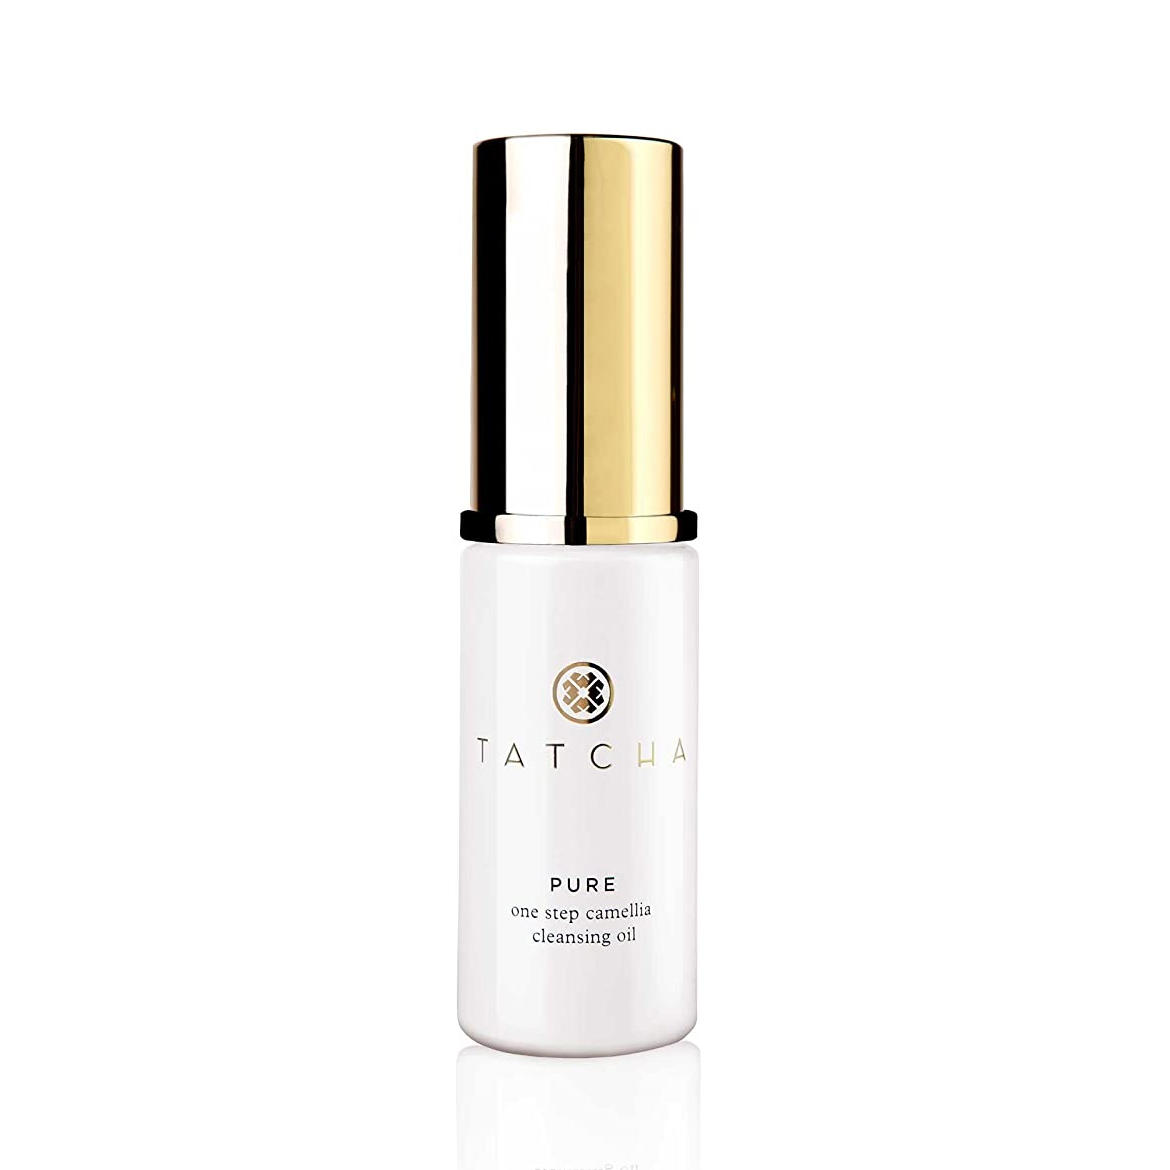 Tatcha Pure One Step Camellia Cleansing Oil 25ml